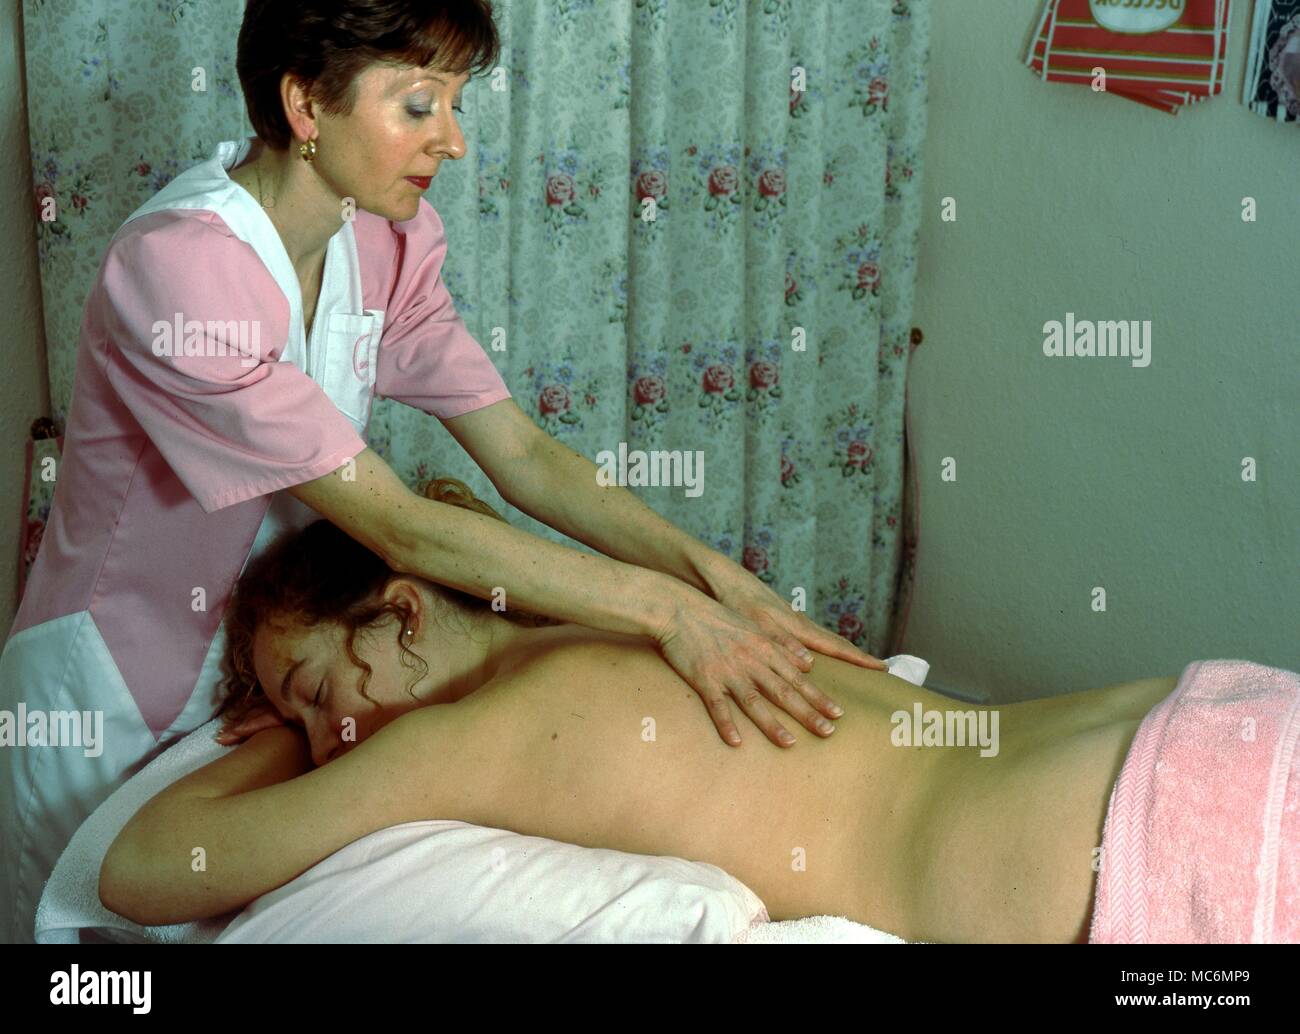 A spinal massage according to the treatment advocated by Decleor of Paris. Stock Photo